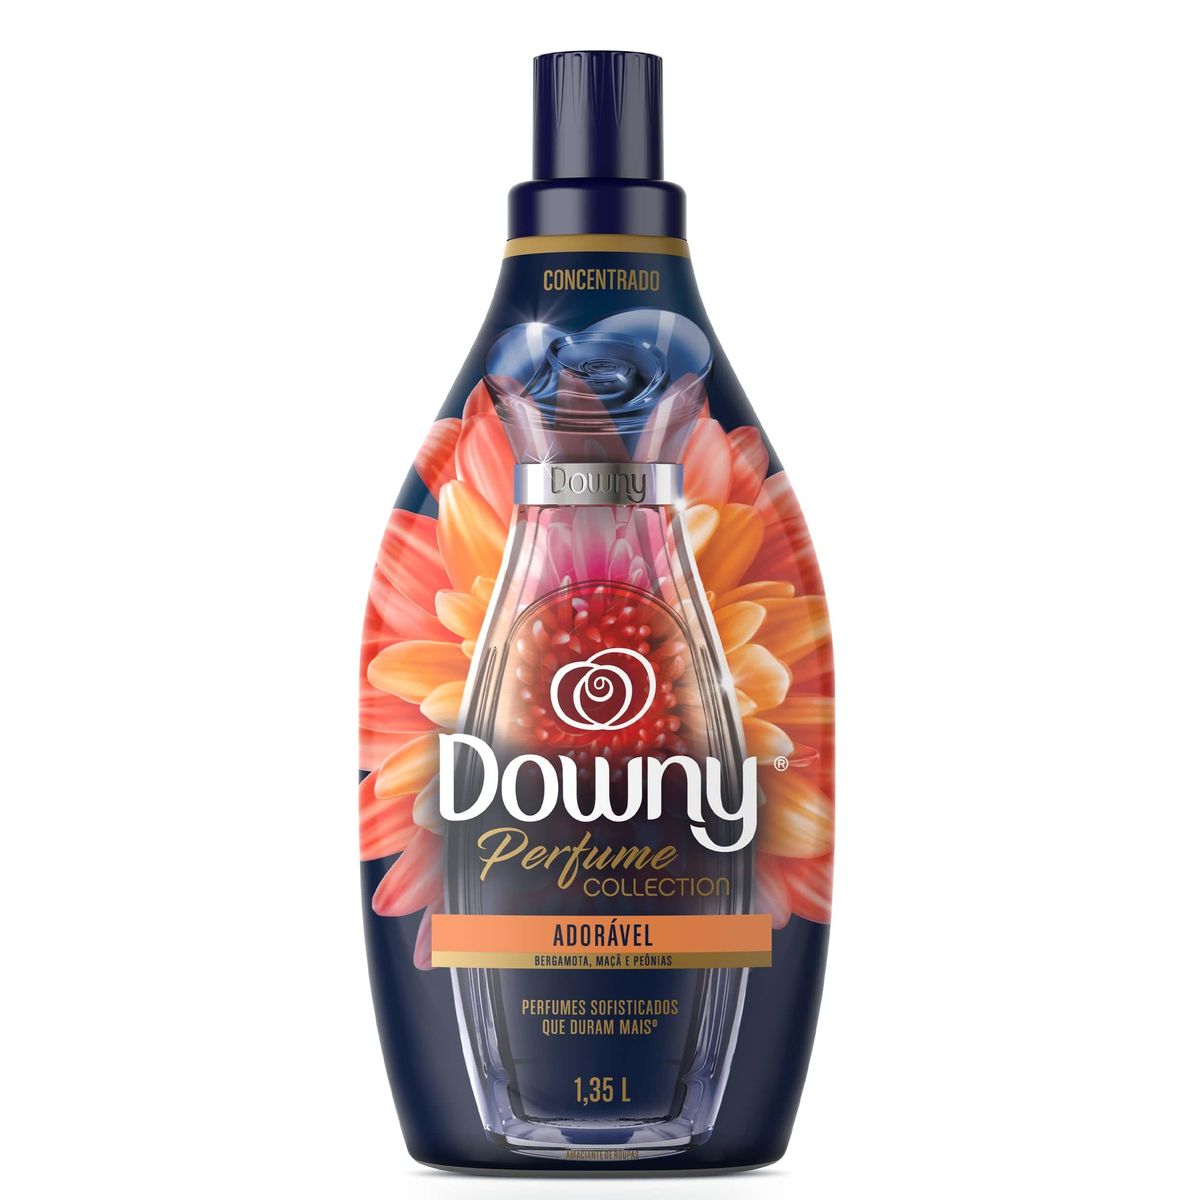 Amaciante Conc. Downy Perfume Collection Adorável 1,35L image number 0